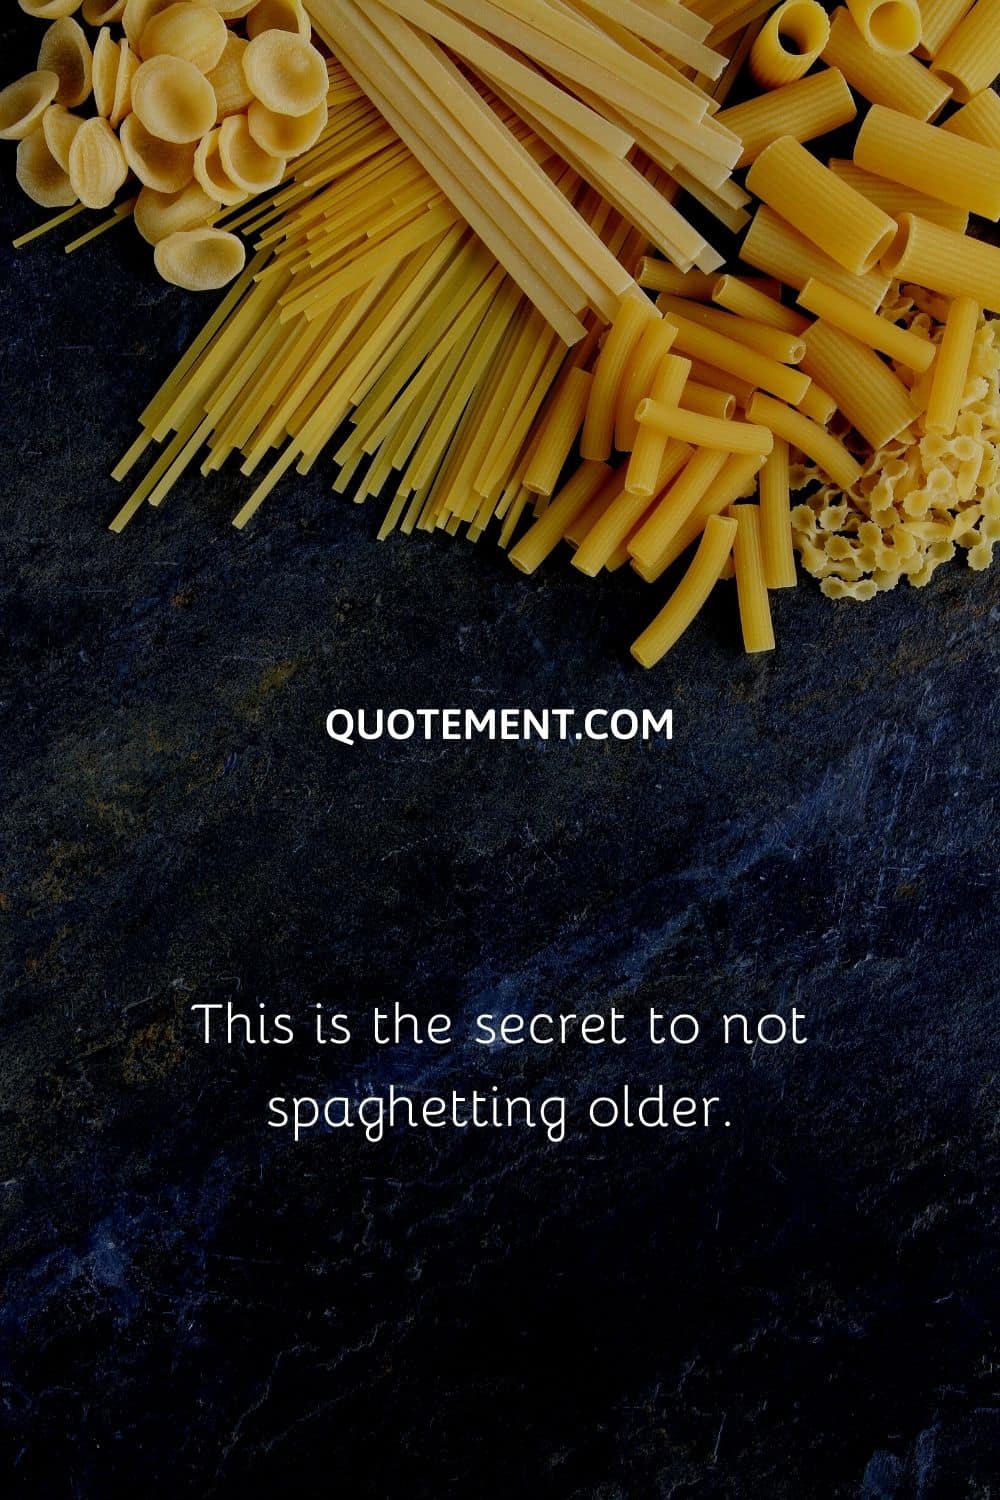 This is the secret to not spaghetting older